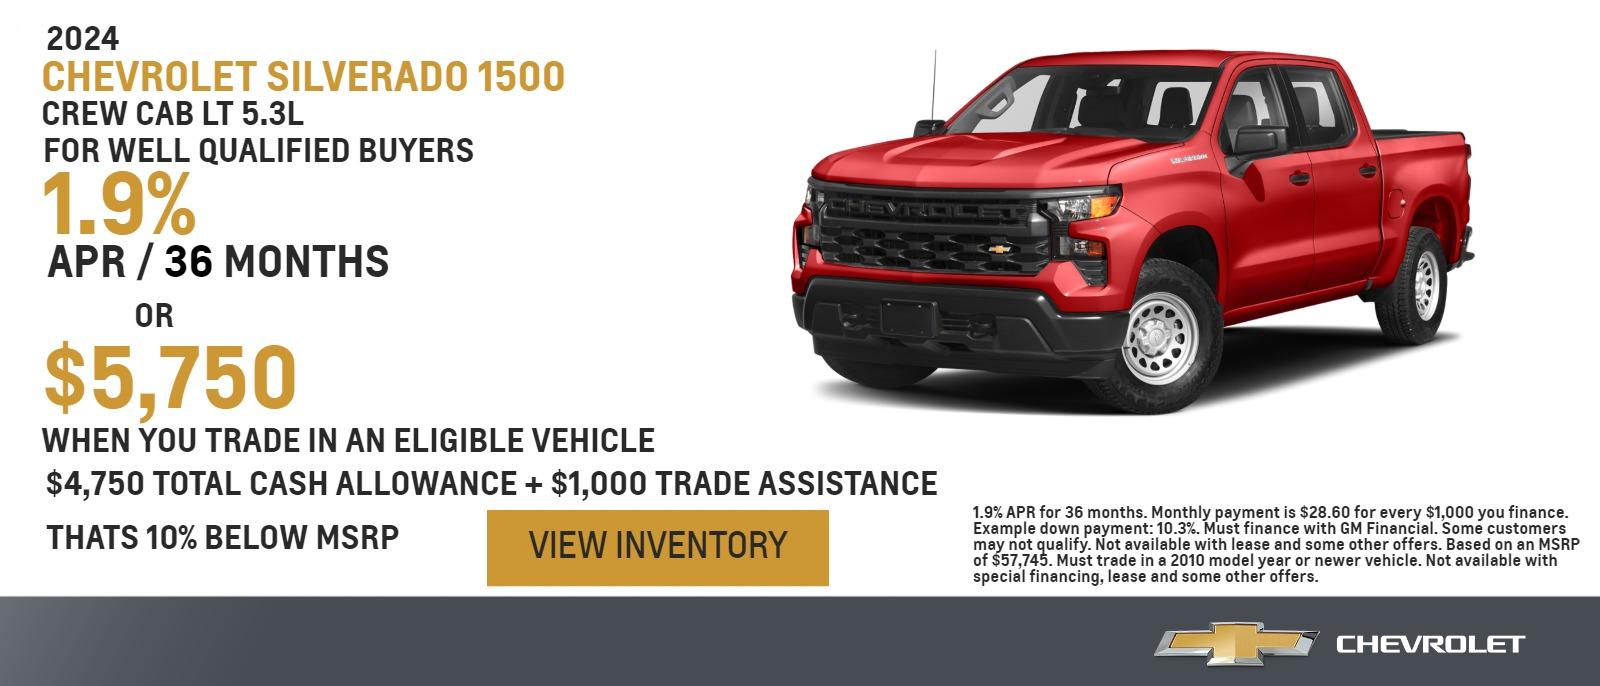 Spring Into Adventure Logo
For well-qualified buyers
1.9% APR†

or
$5,750
TOTAL VALUE
when you trade in an eligible vehicle†

$4,750 TOTAL CASH ALLOWANCE + $1,000 TRADE ASSISTANCE